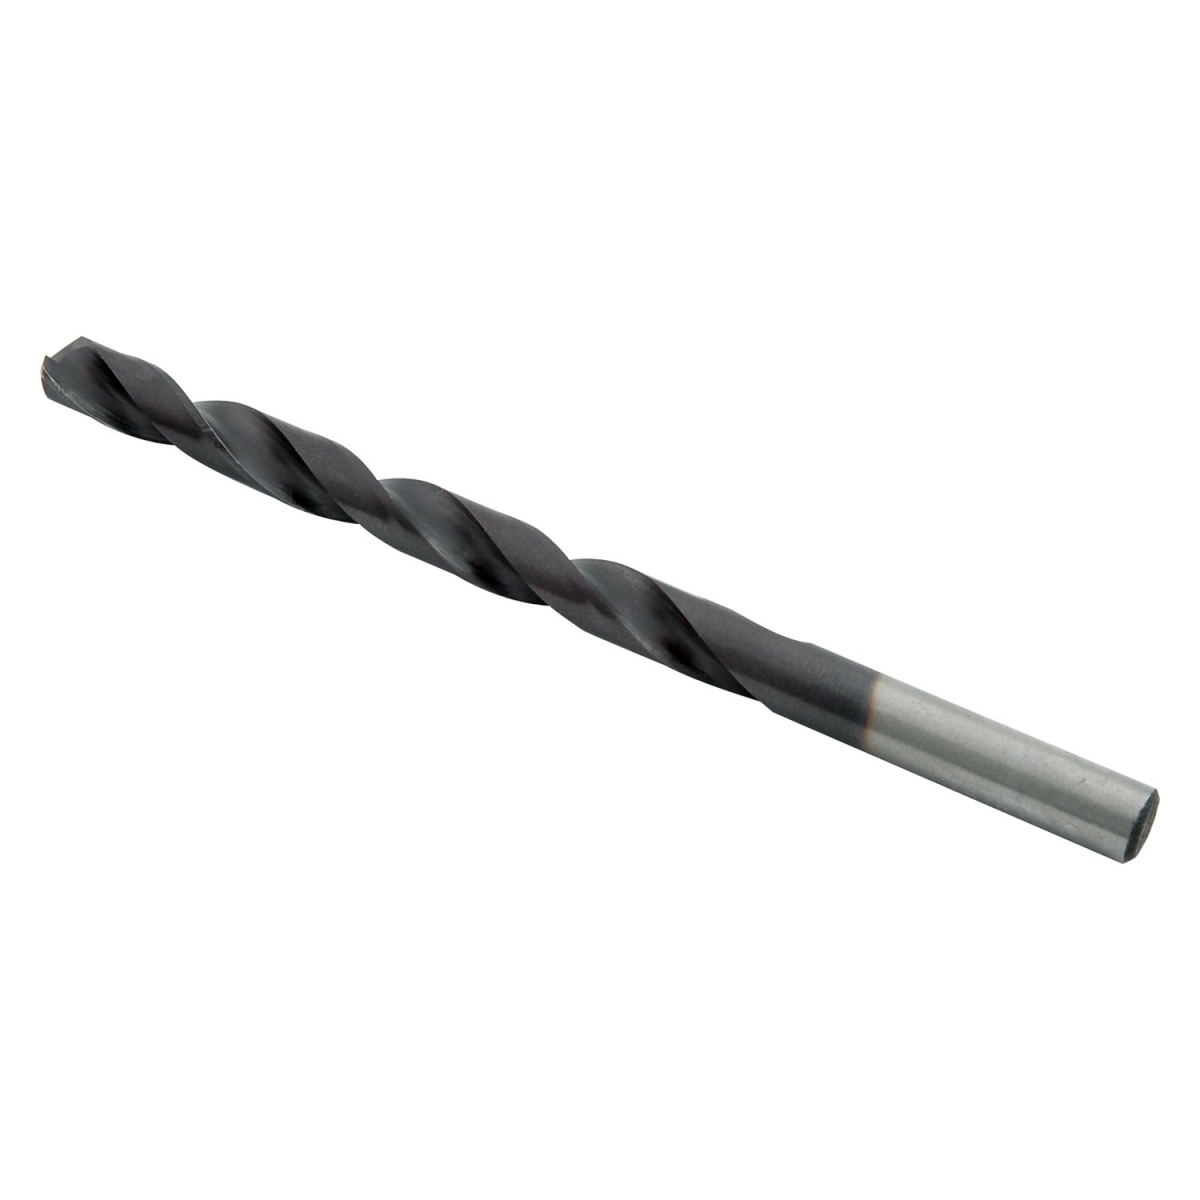 Picture of Allstar Performance ALL23115 17-64 Spring Steel Drill Bit